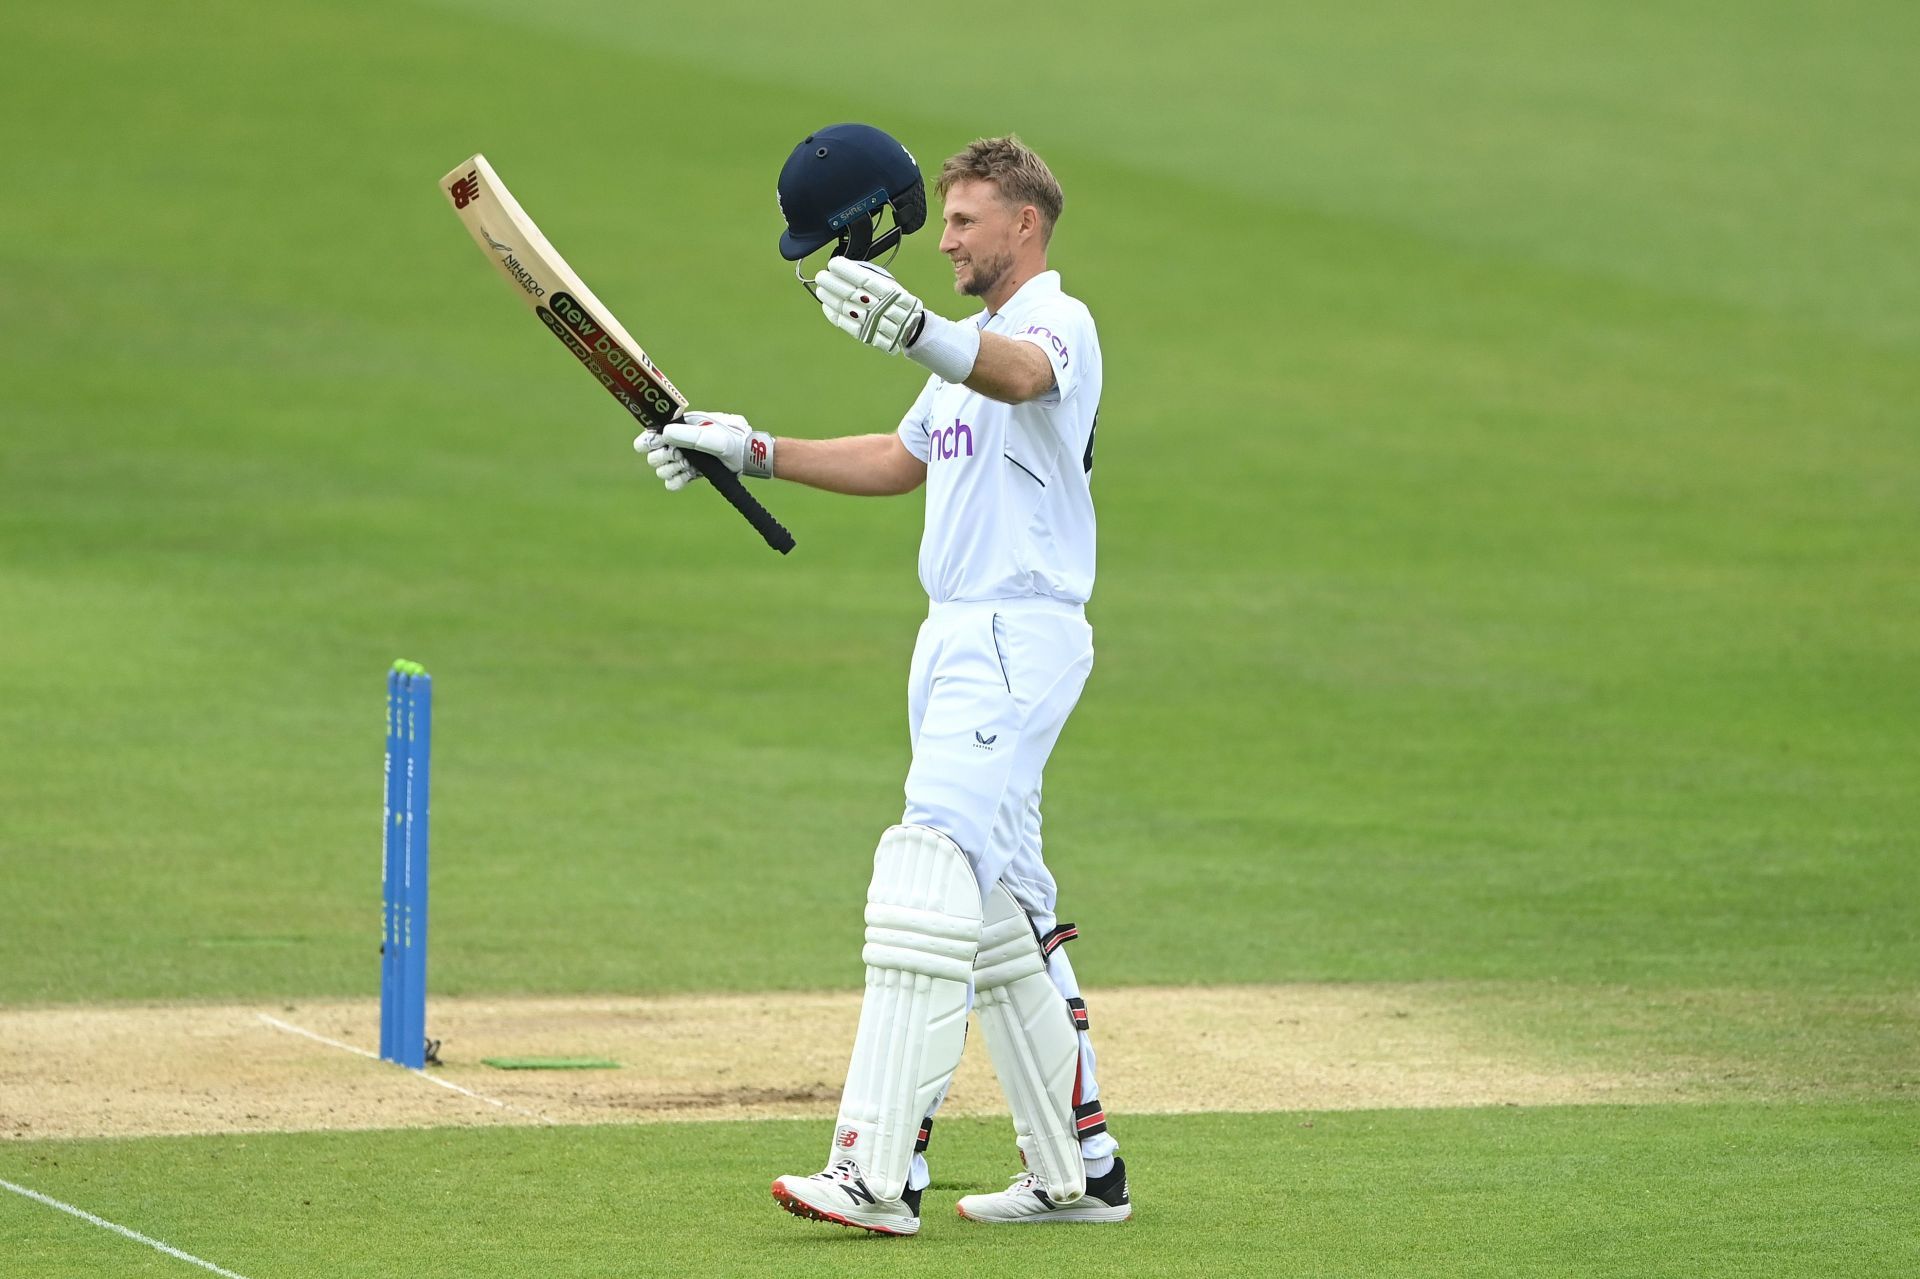 Joe Root has been on a run-scoring spree in the last couple of years